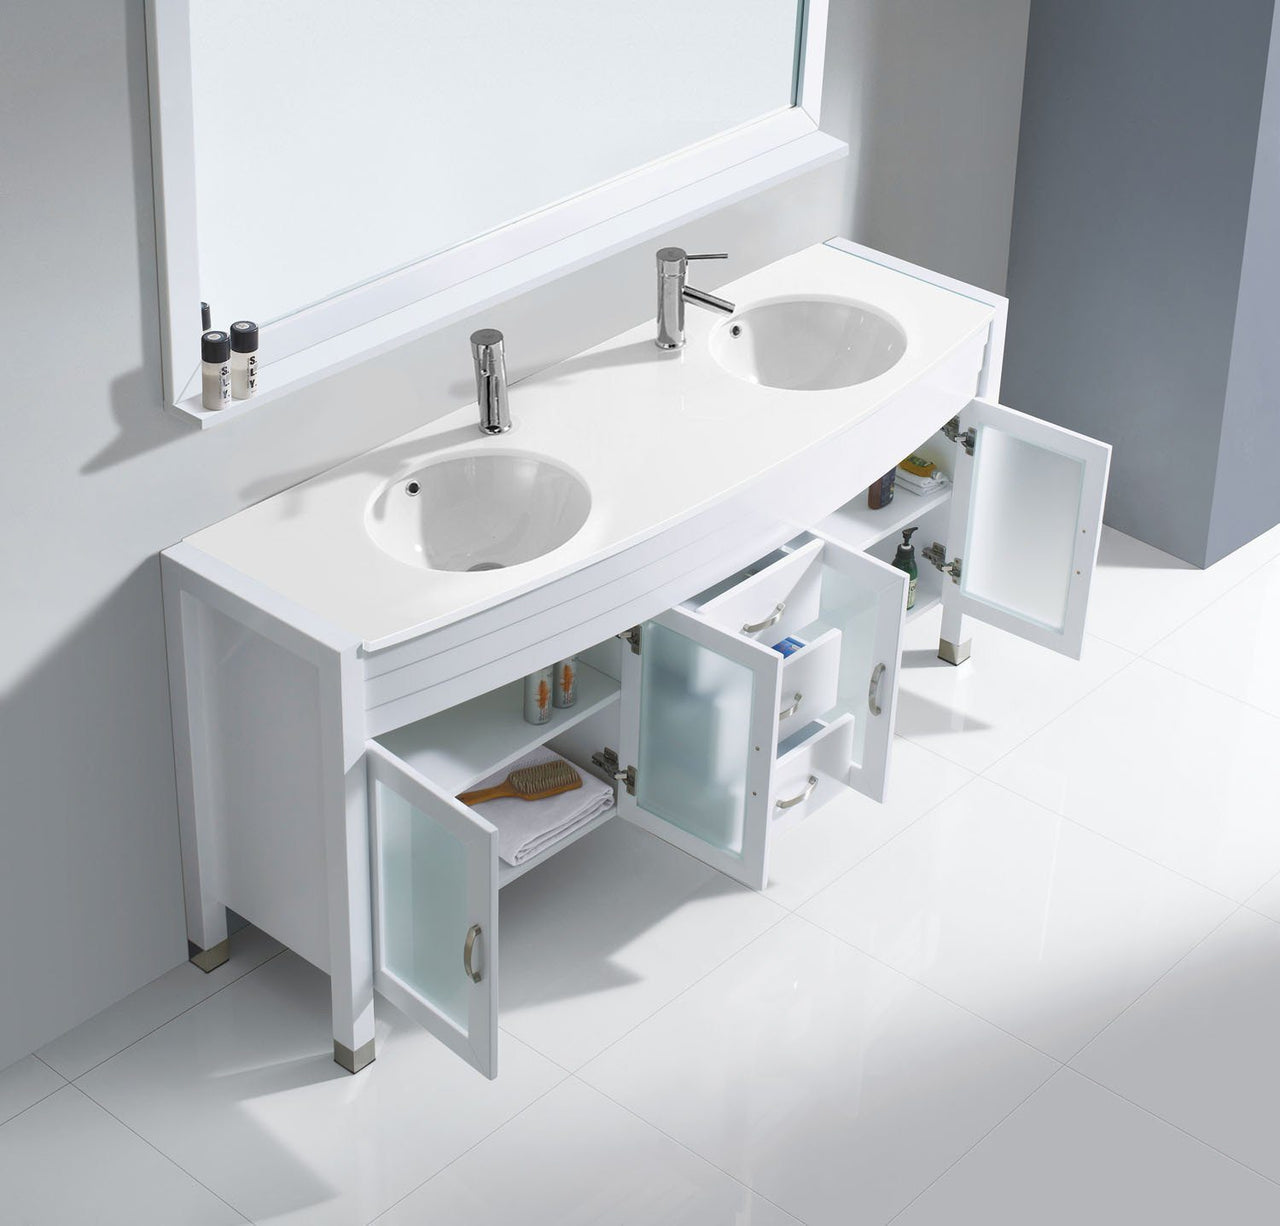 Virtu USA Ava 71" Double Round Sink White Top Vanity in White with Brushed Nickel Faucet and Mirror Vanity Virtu USA 